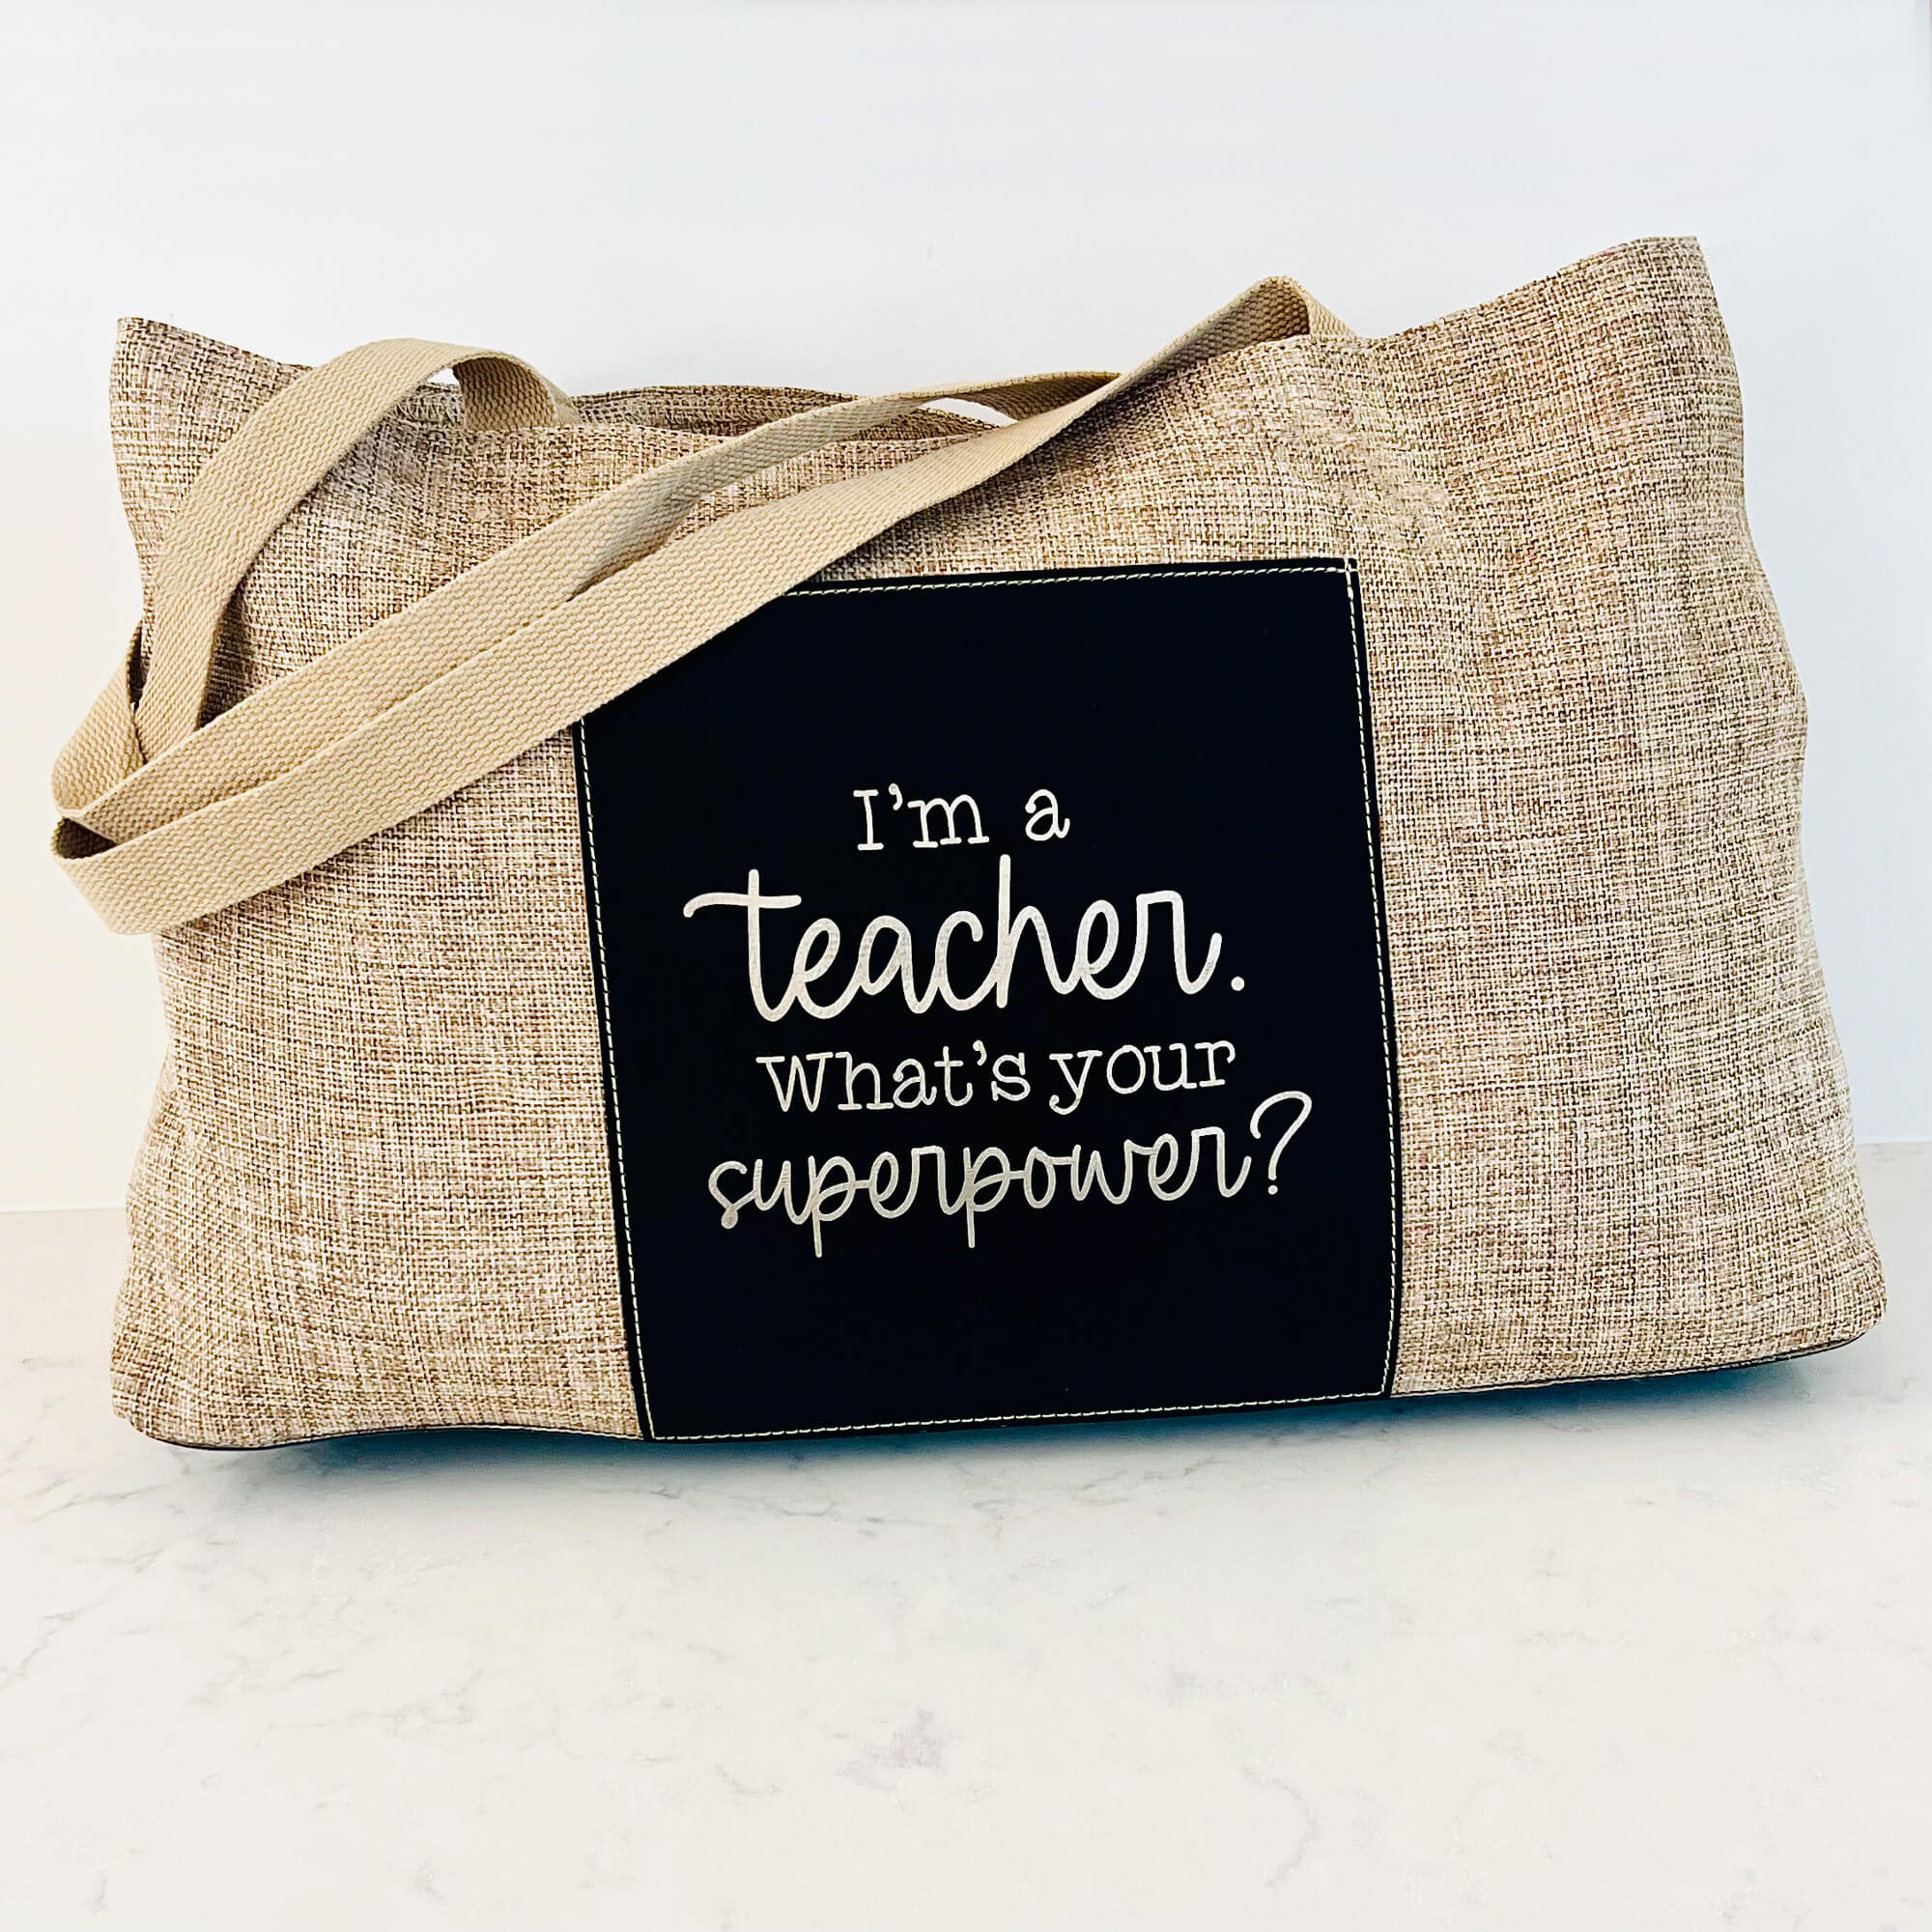 I'm a Teacher. What's Your Superpower? - Burlap Tote Bag